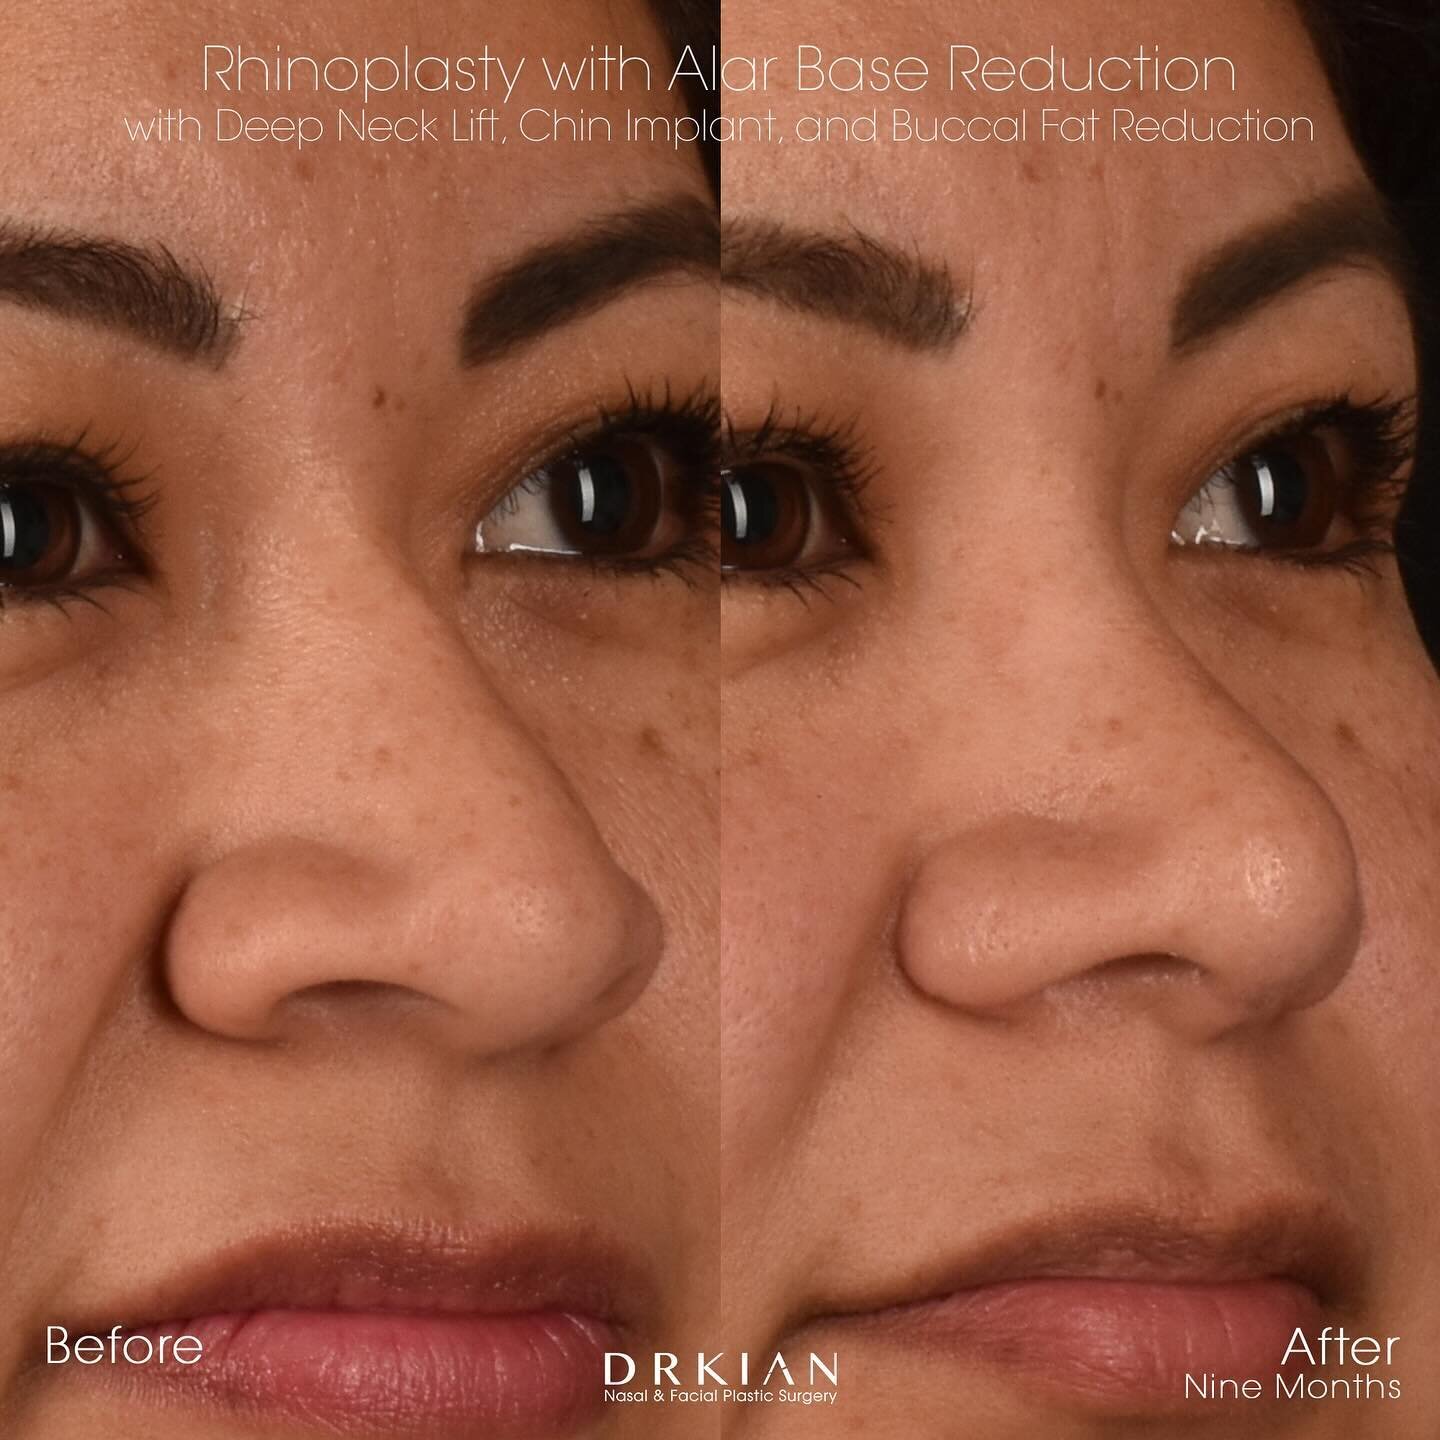 𝐏𝐫𝐨𝐜𝐞𝐝𝐮𝐫𝐞: Rhinoplasty with Alar Base Reduction, Bilateral Turbinoplasty, Chin Implant, Deep Neck Lift and Buccal Fat Reduction
𝐑𝐞𝐬𝐮𝐥𝐭𝐬: Before &amp; After Nine Months
𝐒𝐮𝐫𝐠𝐞𝐨𝐧&rsquo;𝐬 𝐍𝐨𝐭𝐞: Vicki is nine months out from he